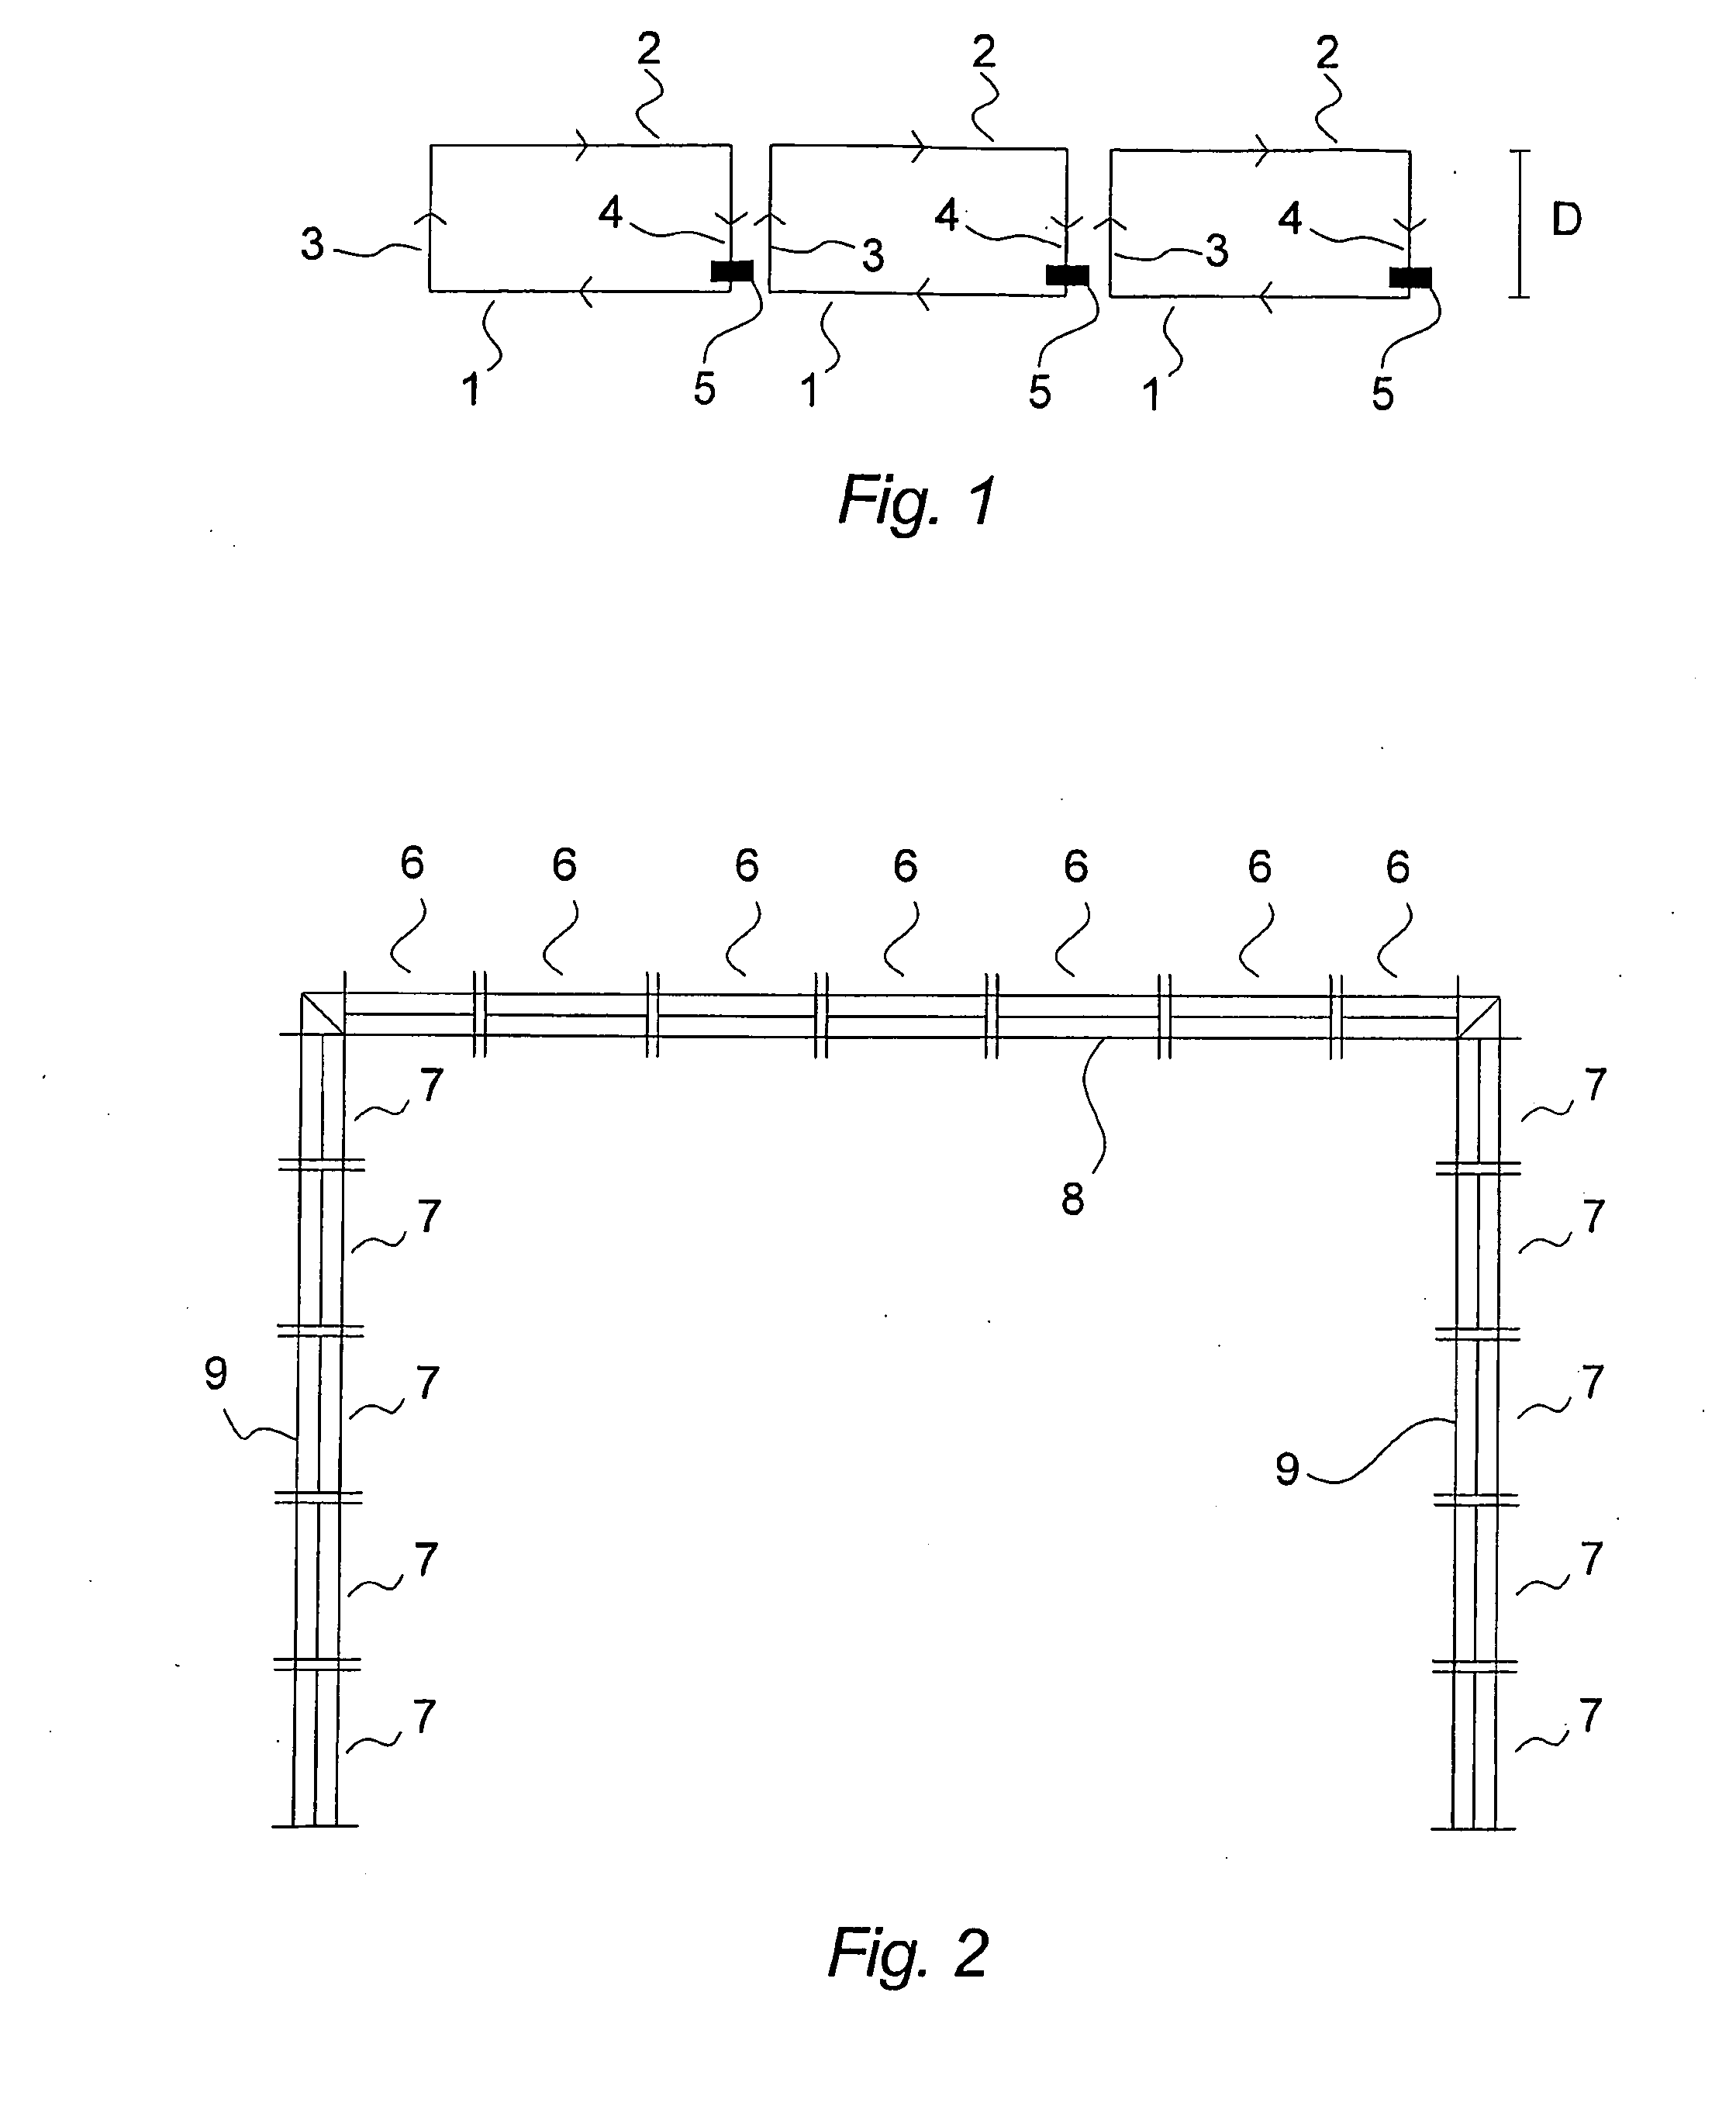 Goal Detector for Detection of an Object Passing a Goal Plane